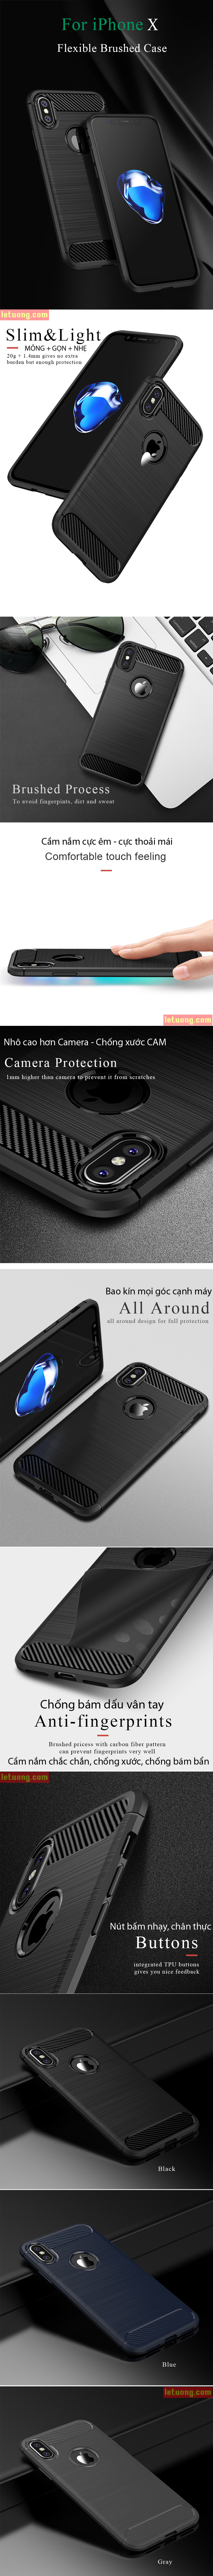 op-lung-iphone-x-iphone-10-ipaky-case-carbon-l%C6%B0ng-phay-xuoc-14.jpg